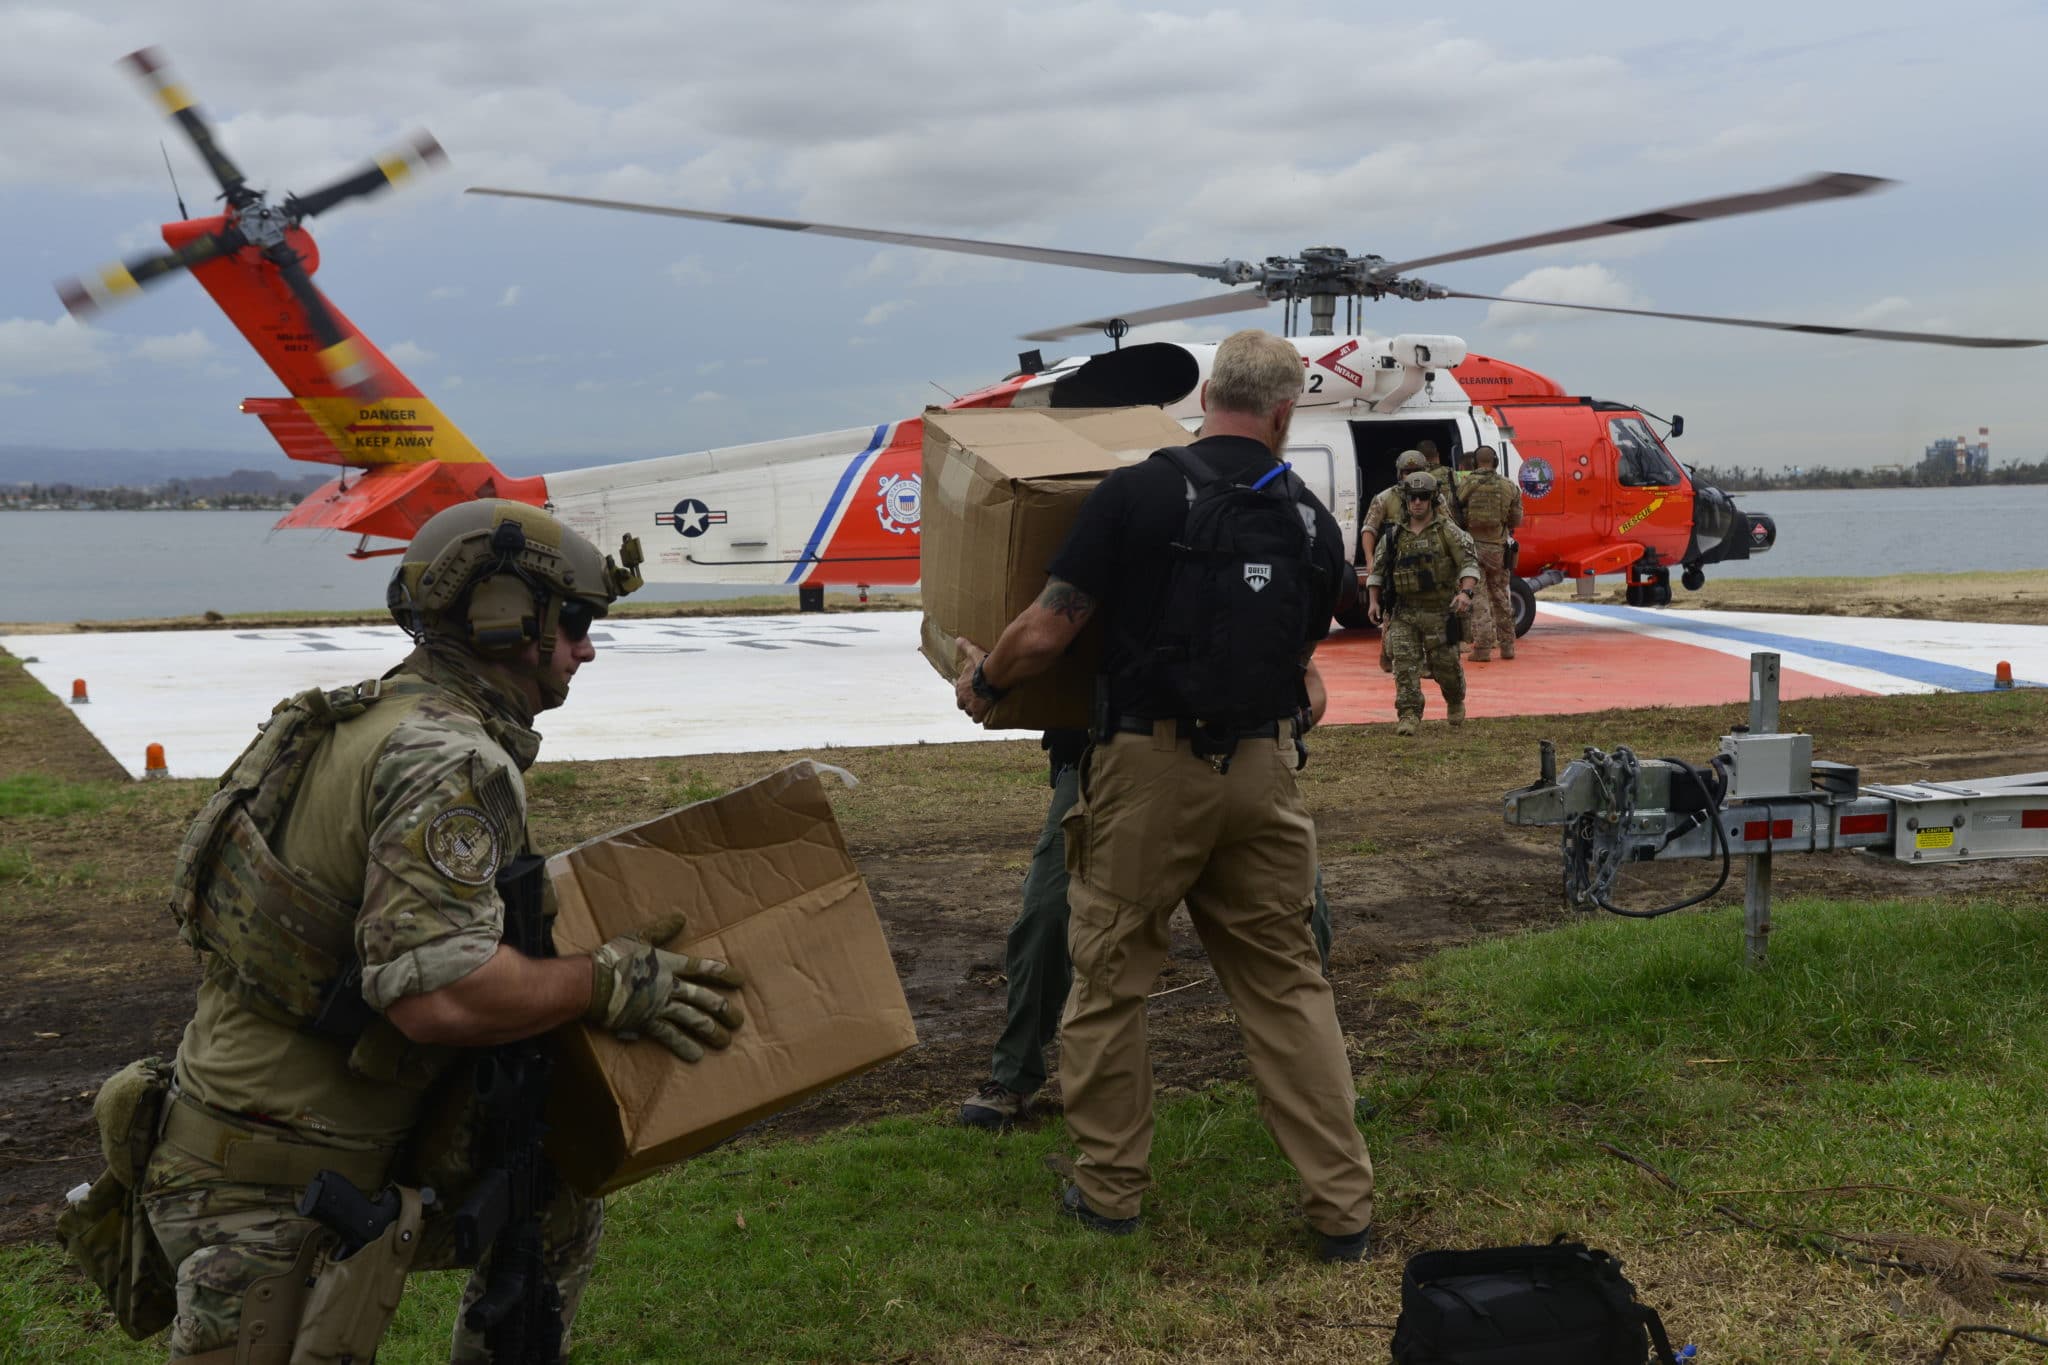 Troops load supplies into a Coast Guard helicopter